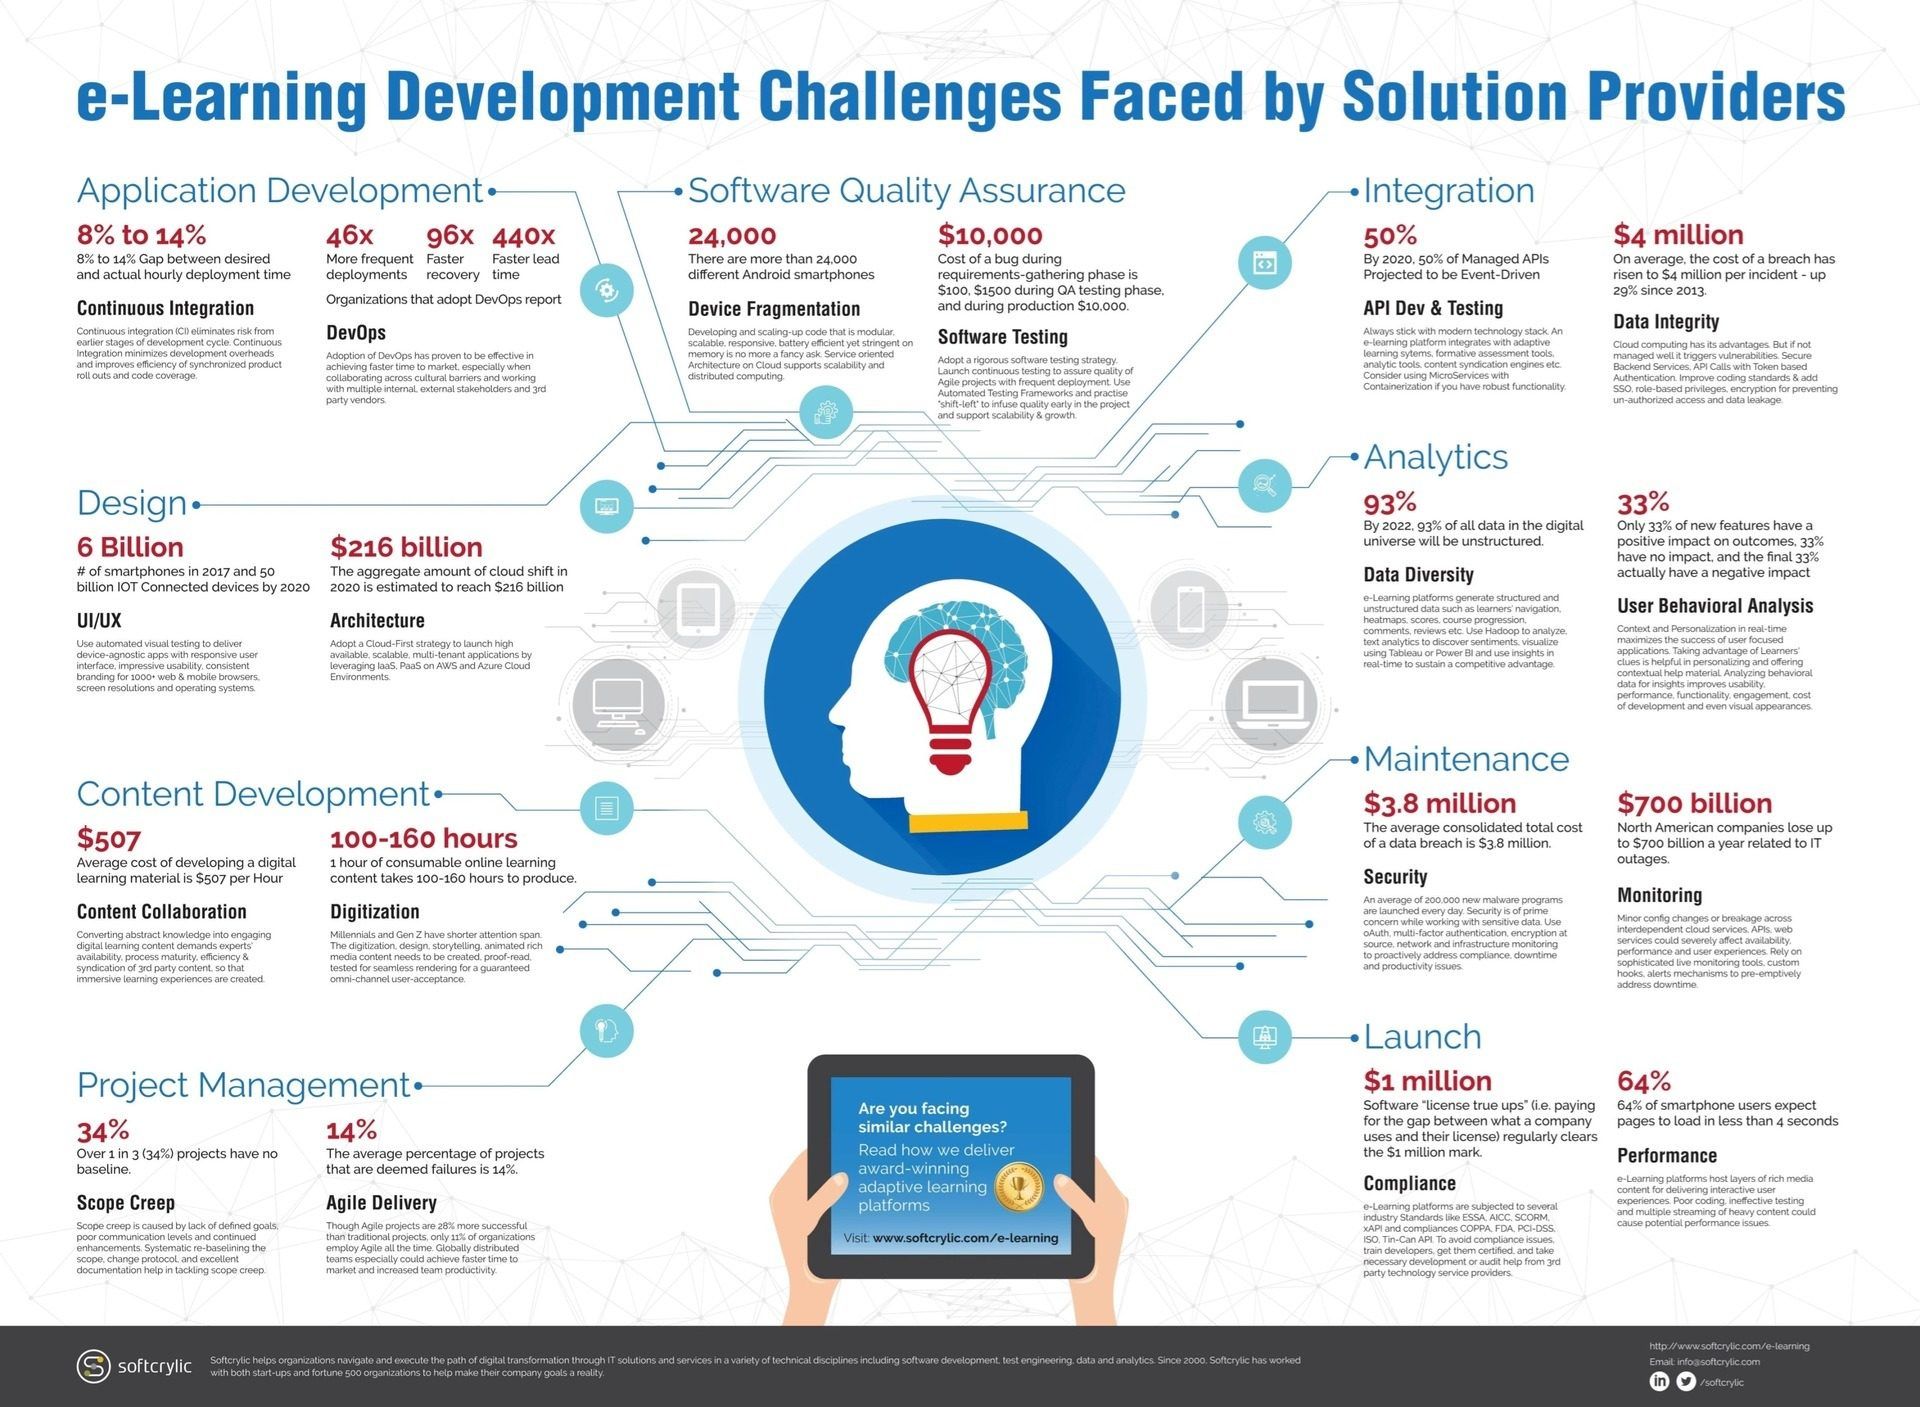 eLearning Development Challenges Faced by Solution Providers Infographic